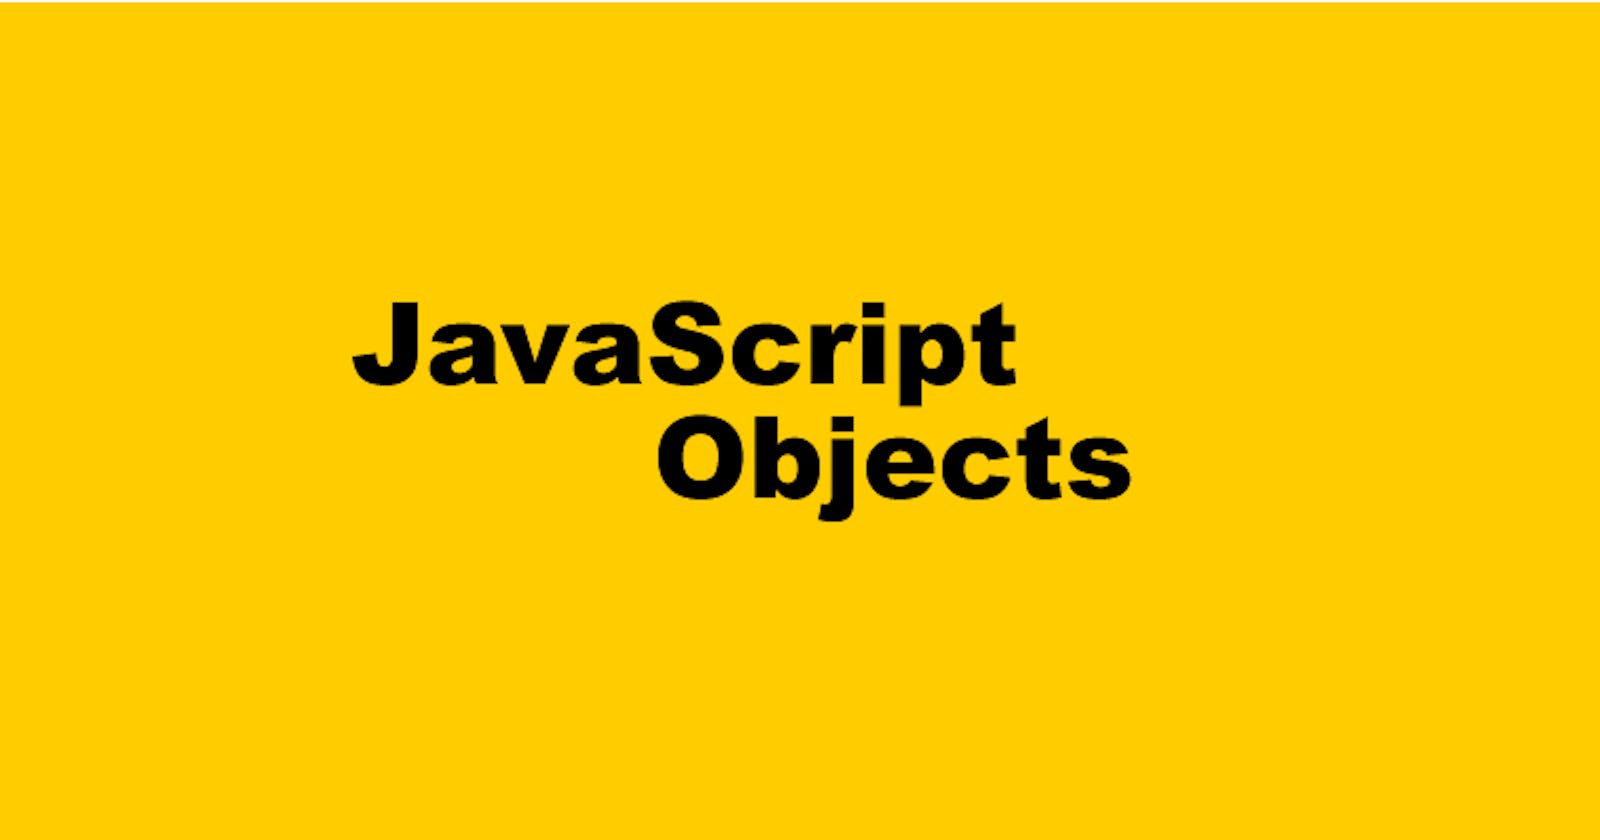 Objects in JavaScripts